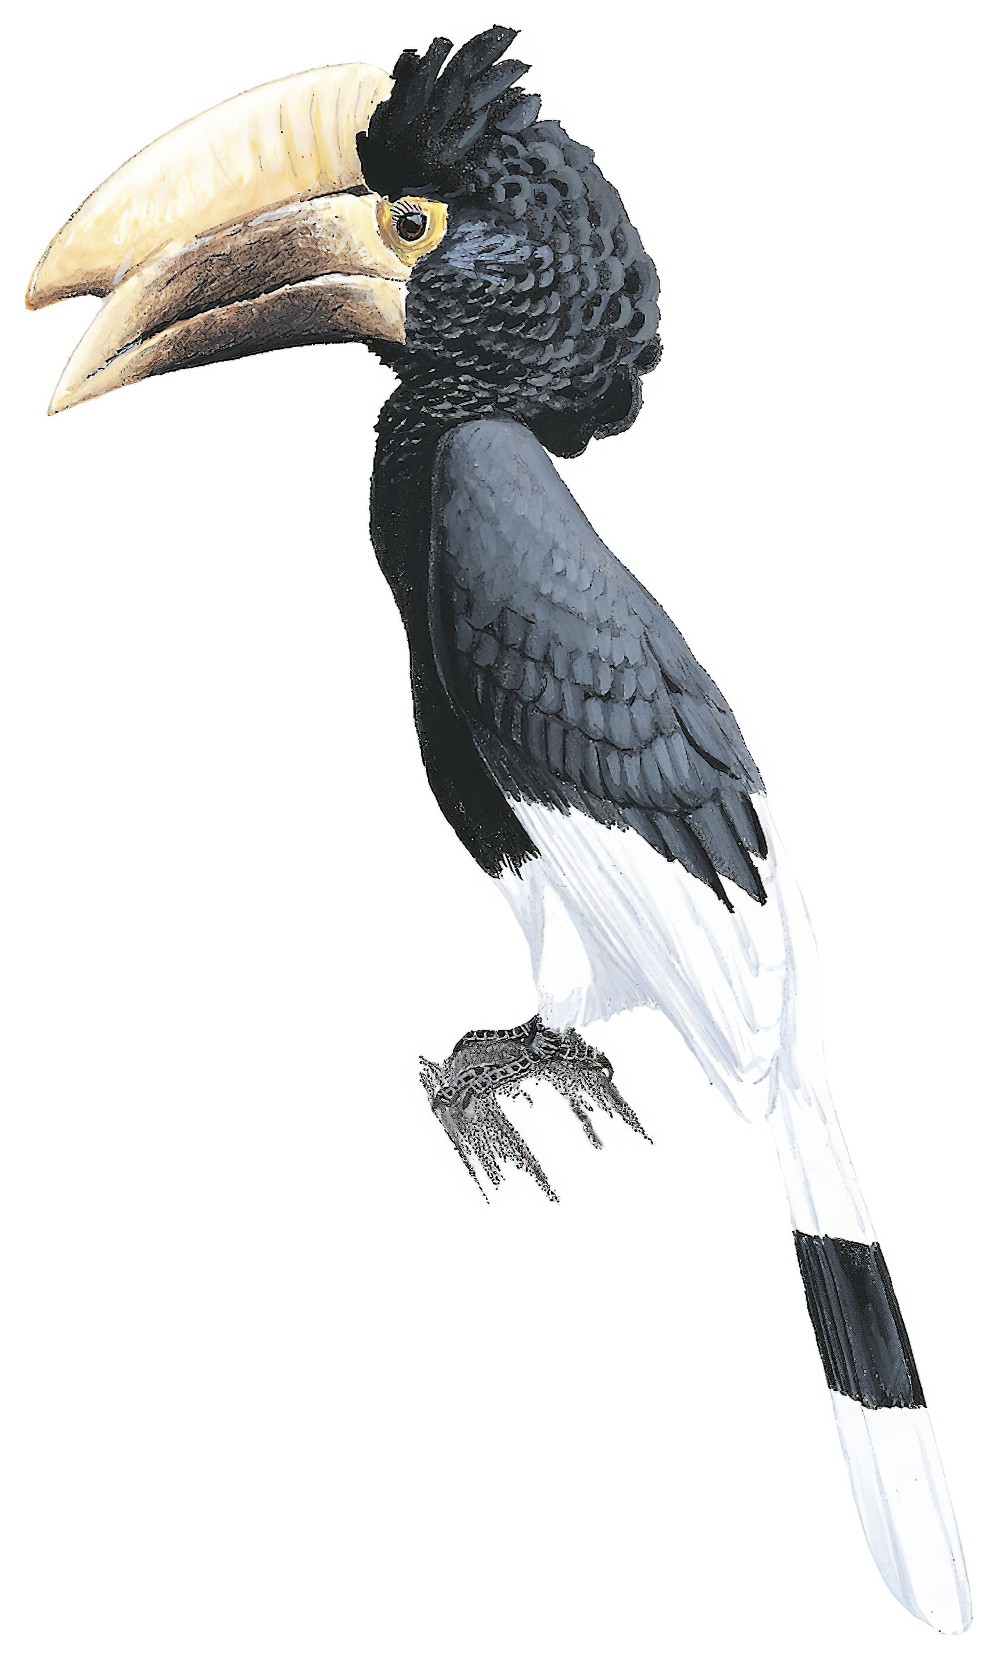 White-thighed Hornbill / Bycanistes albotibialis